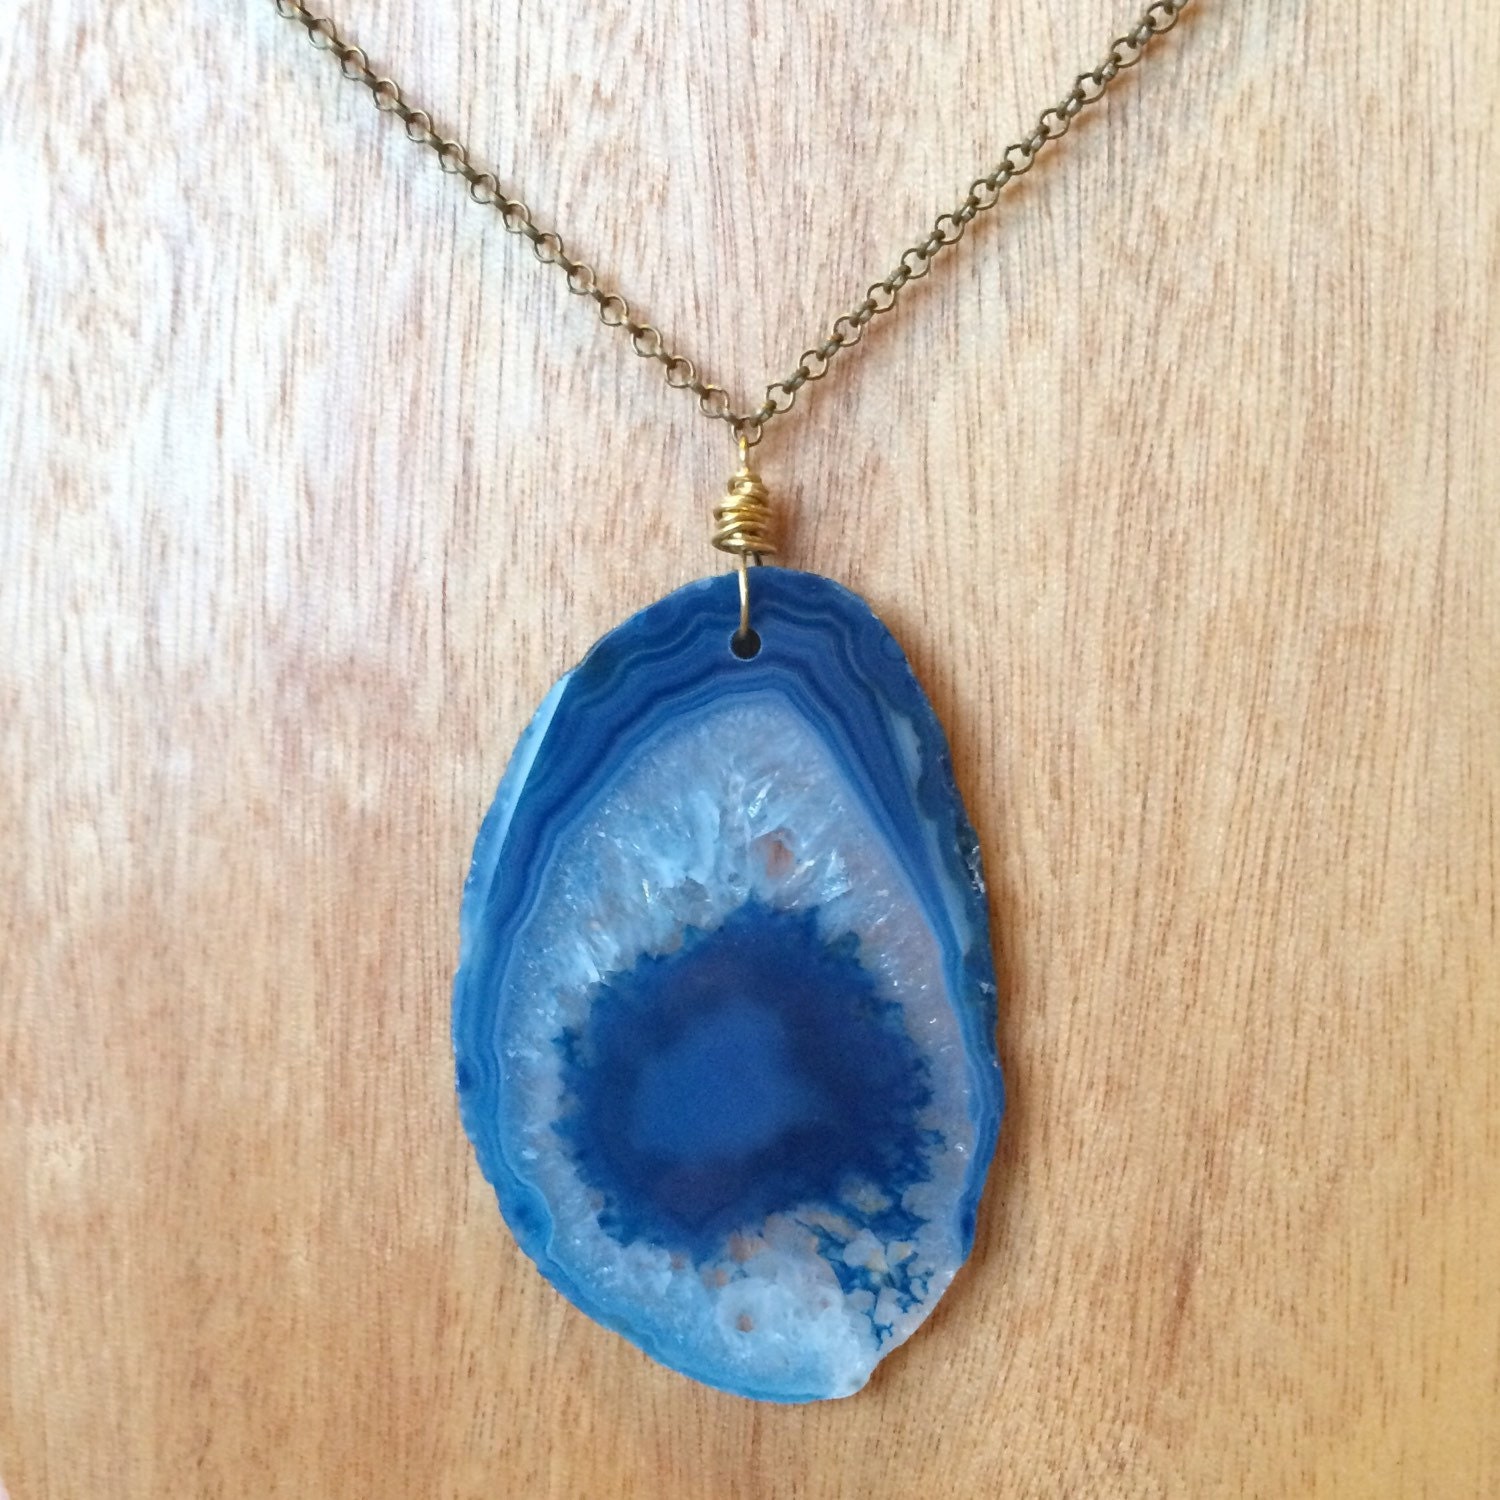 Agate Slice Pendant by LavaLake on Etsy